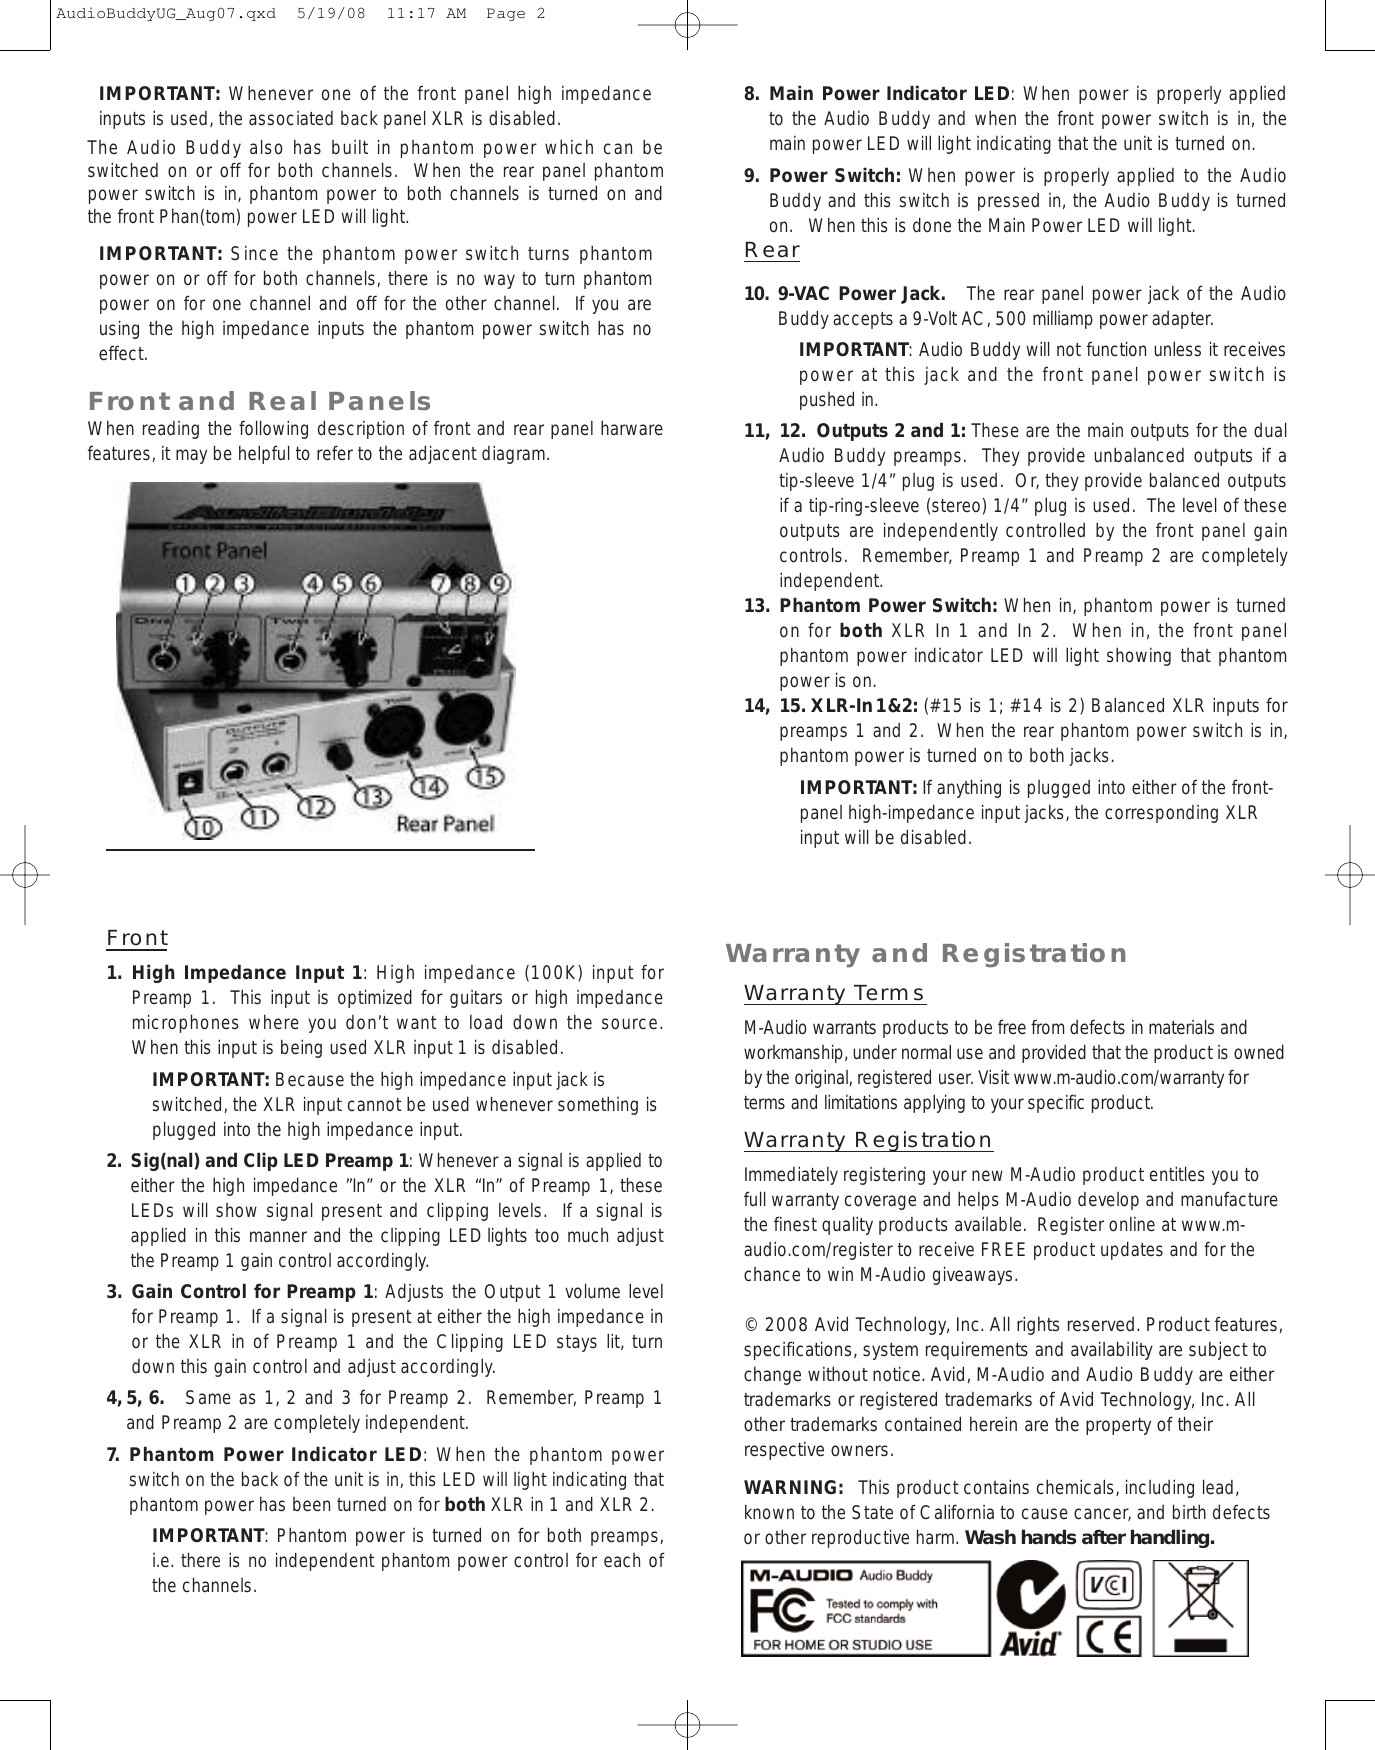 Page 5 of 8 - M-Audio M-Audio-Audio-Buddy-Dual-Mic-Preamp-Users-Manual- Audio Buddy User Guide  M-audio-audio-buddy-dual-mic-preamp-users-manual